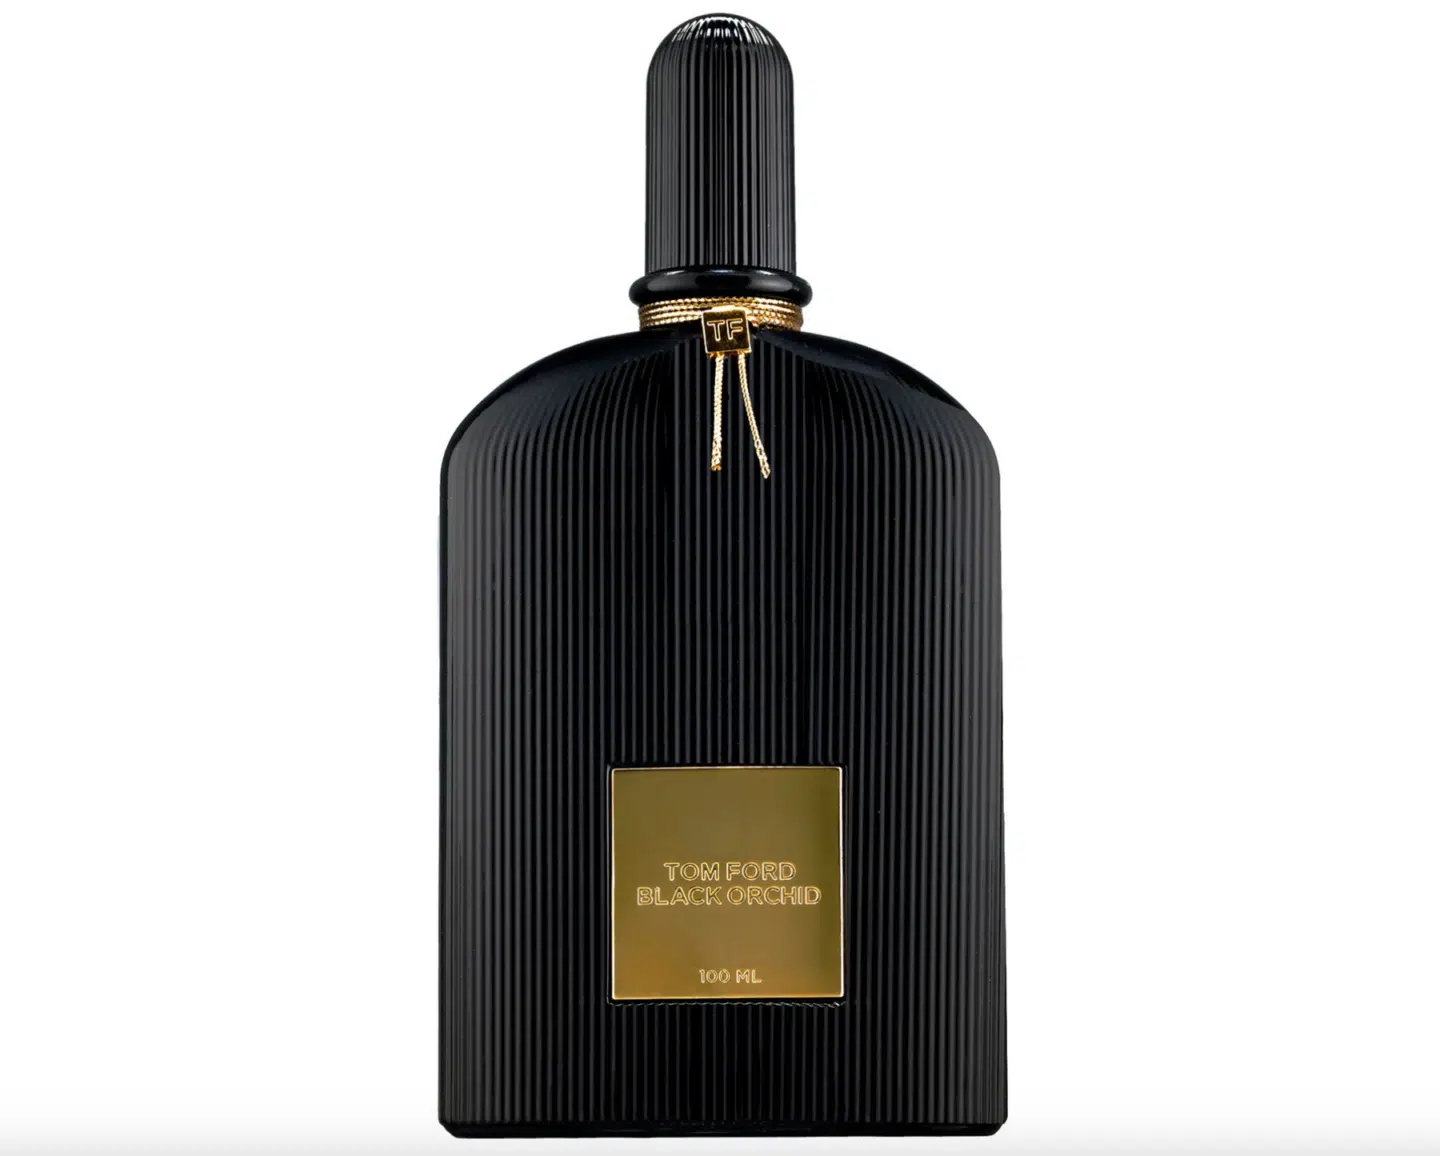 Our Duplication of MATIERE NOIRE by LOUIS VUITTON #40 – The Dupe